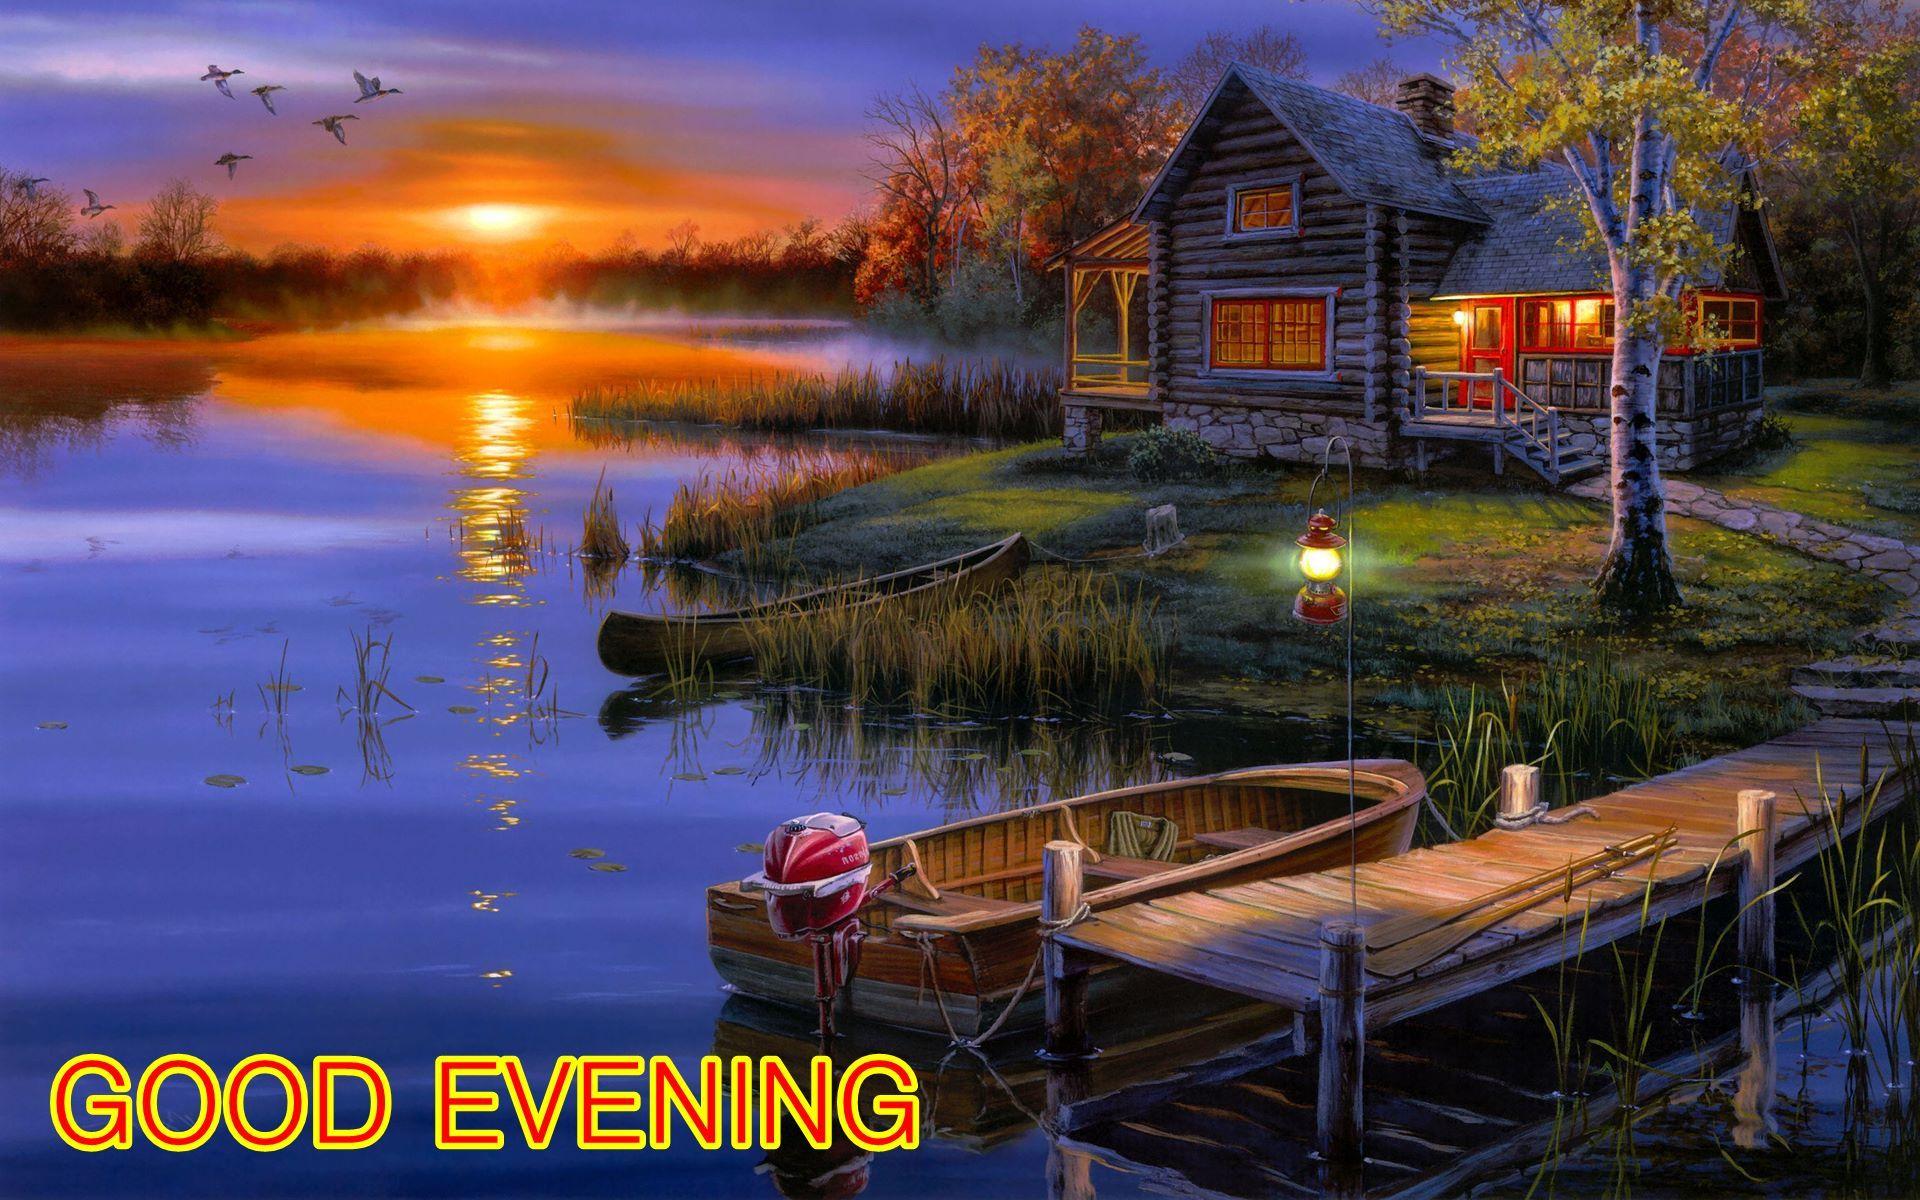 Best Good Evening Image, Wallpaper And Picture Page 1